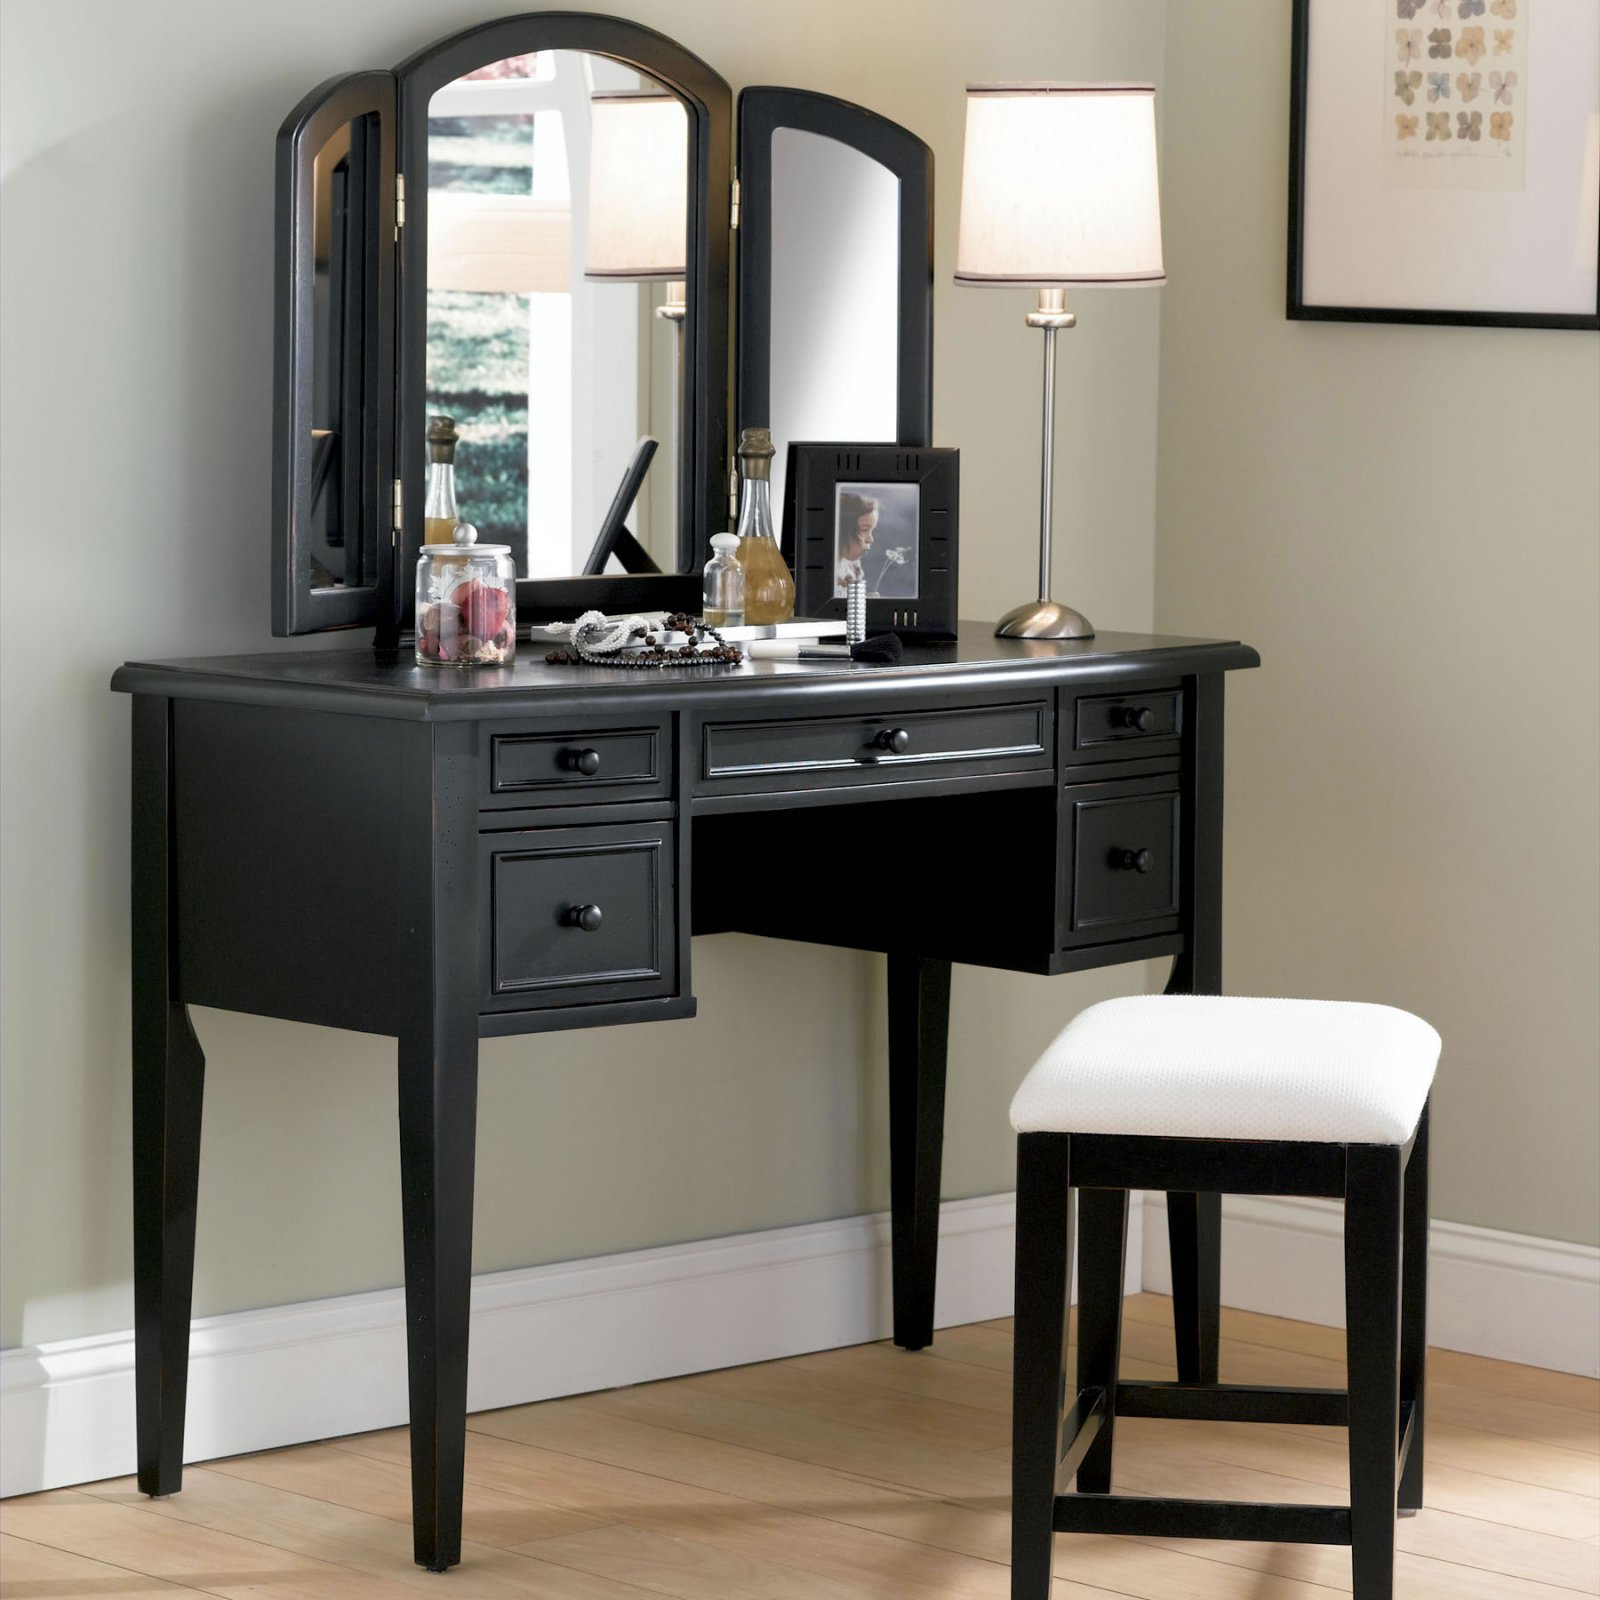 Powell Boulevard Antique Black Bedroom Vanity Set In 2019 Products inside sizing 1600 X 1600